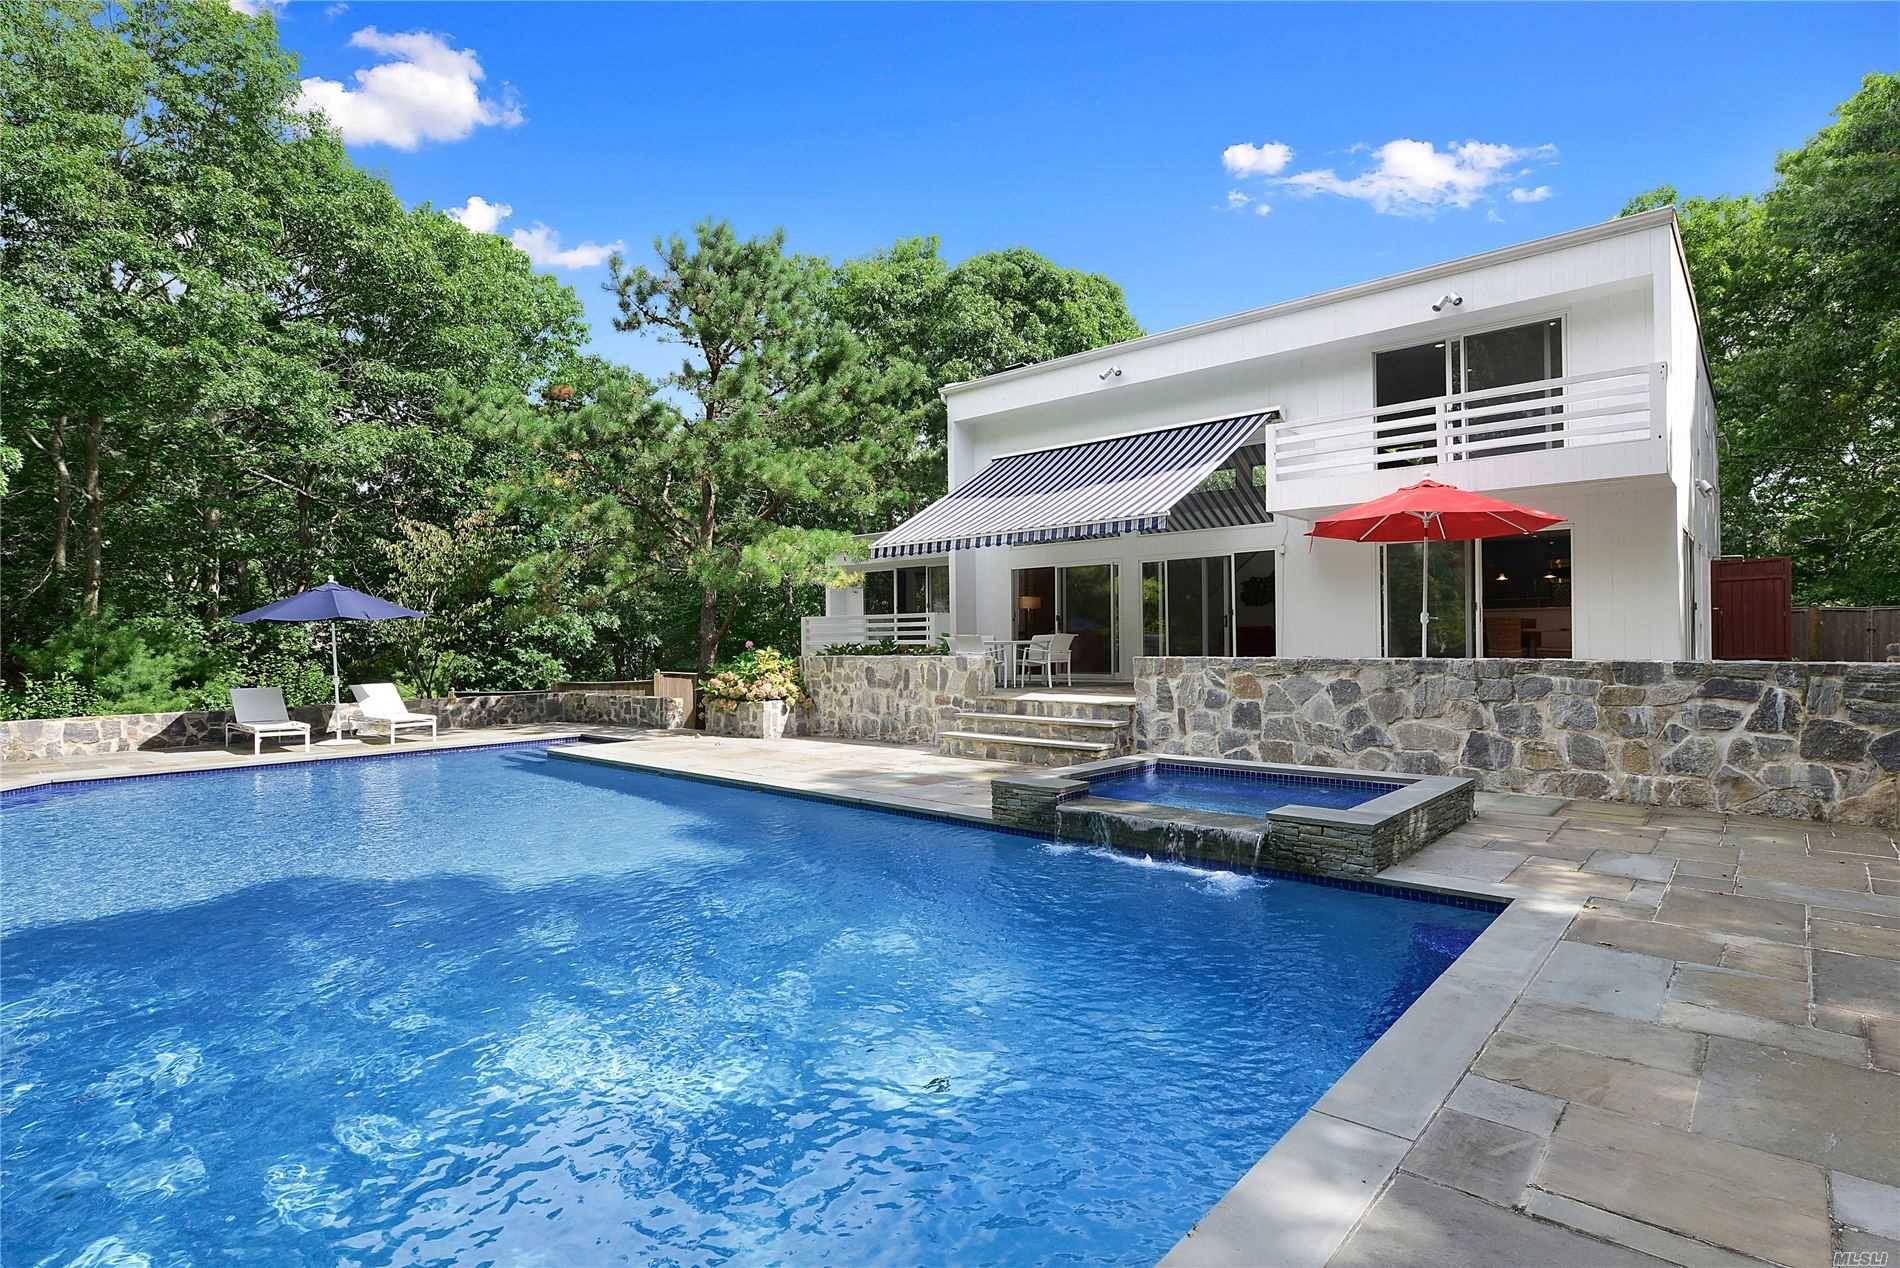 Designed by Myron Shulman, this pristine contemporary home is definitely one of a kind.